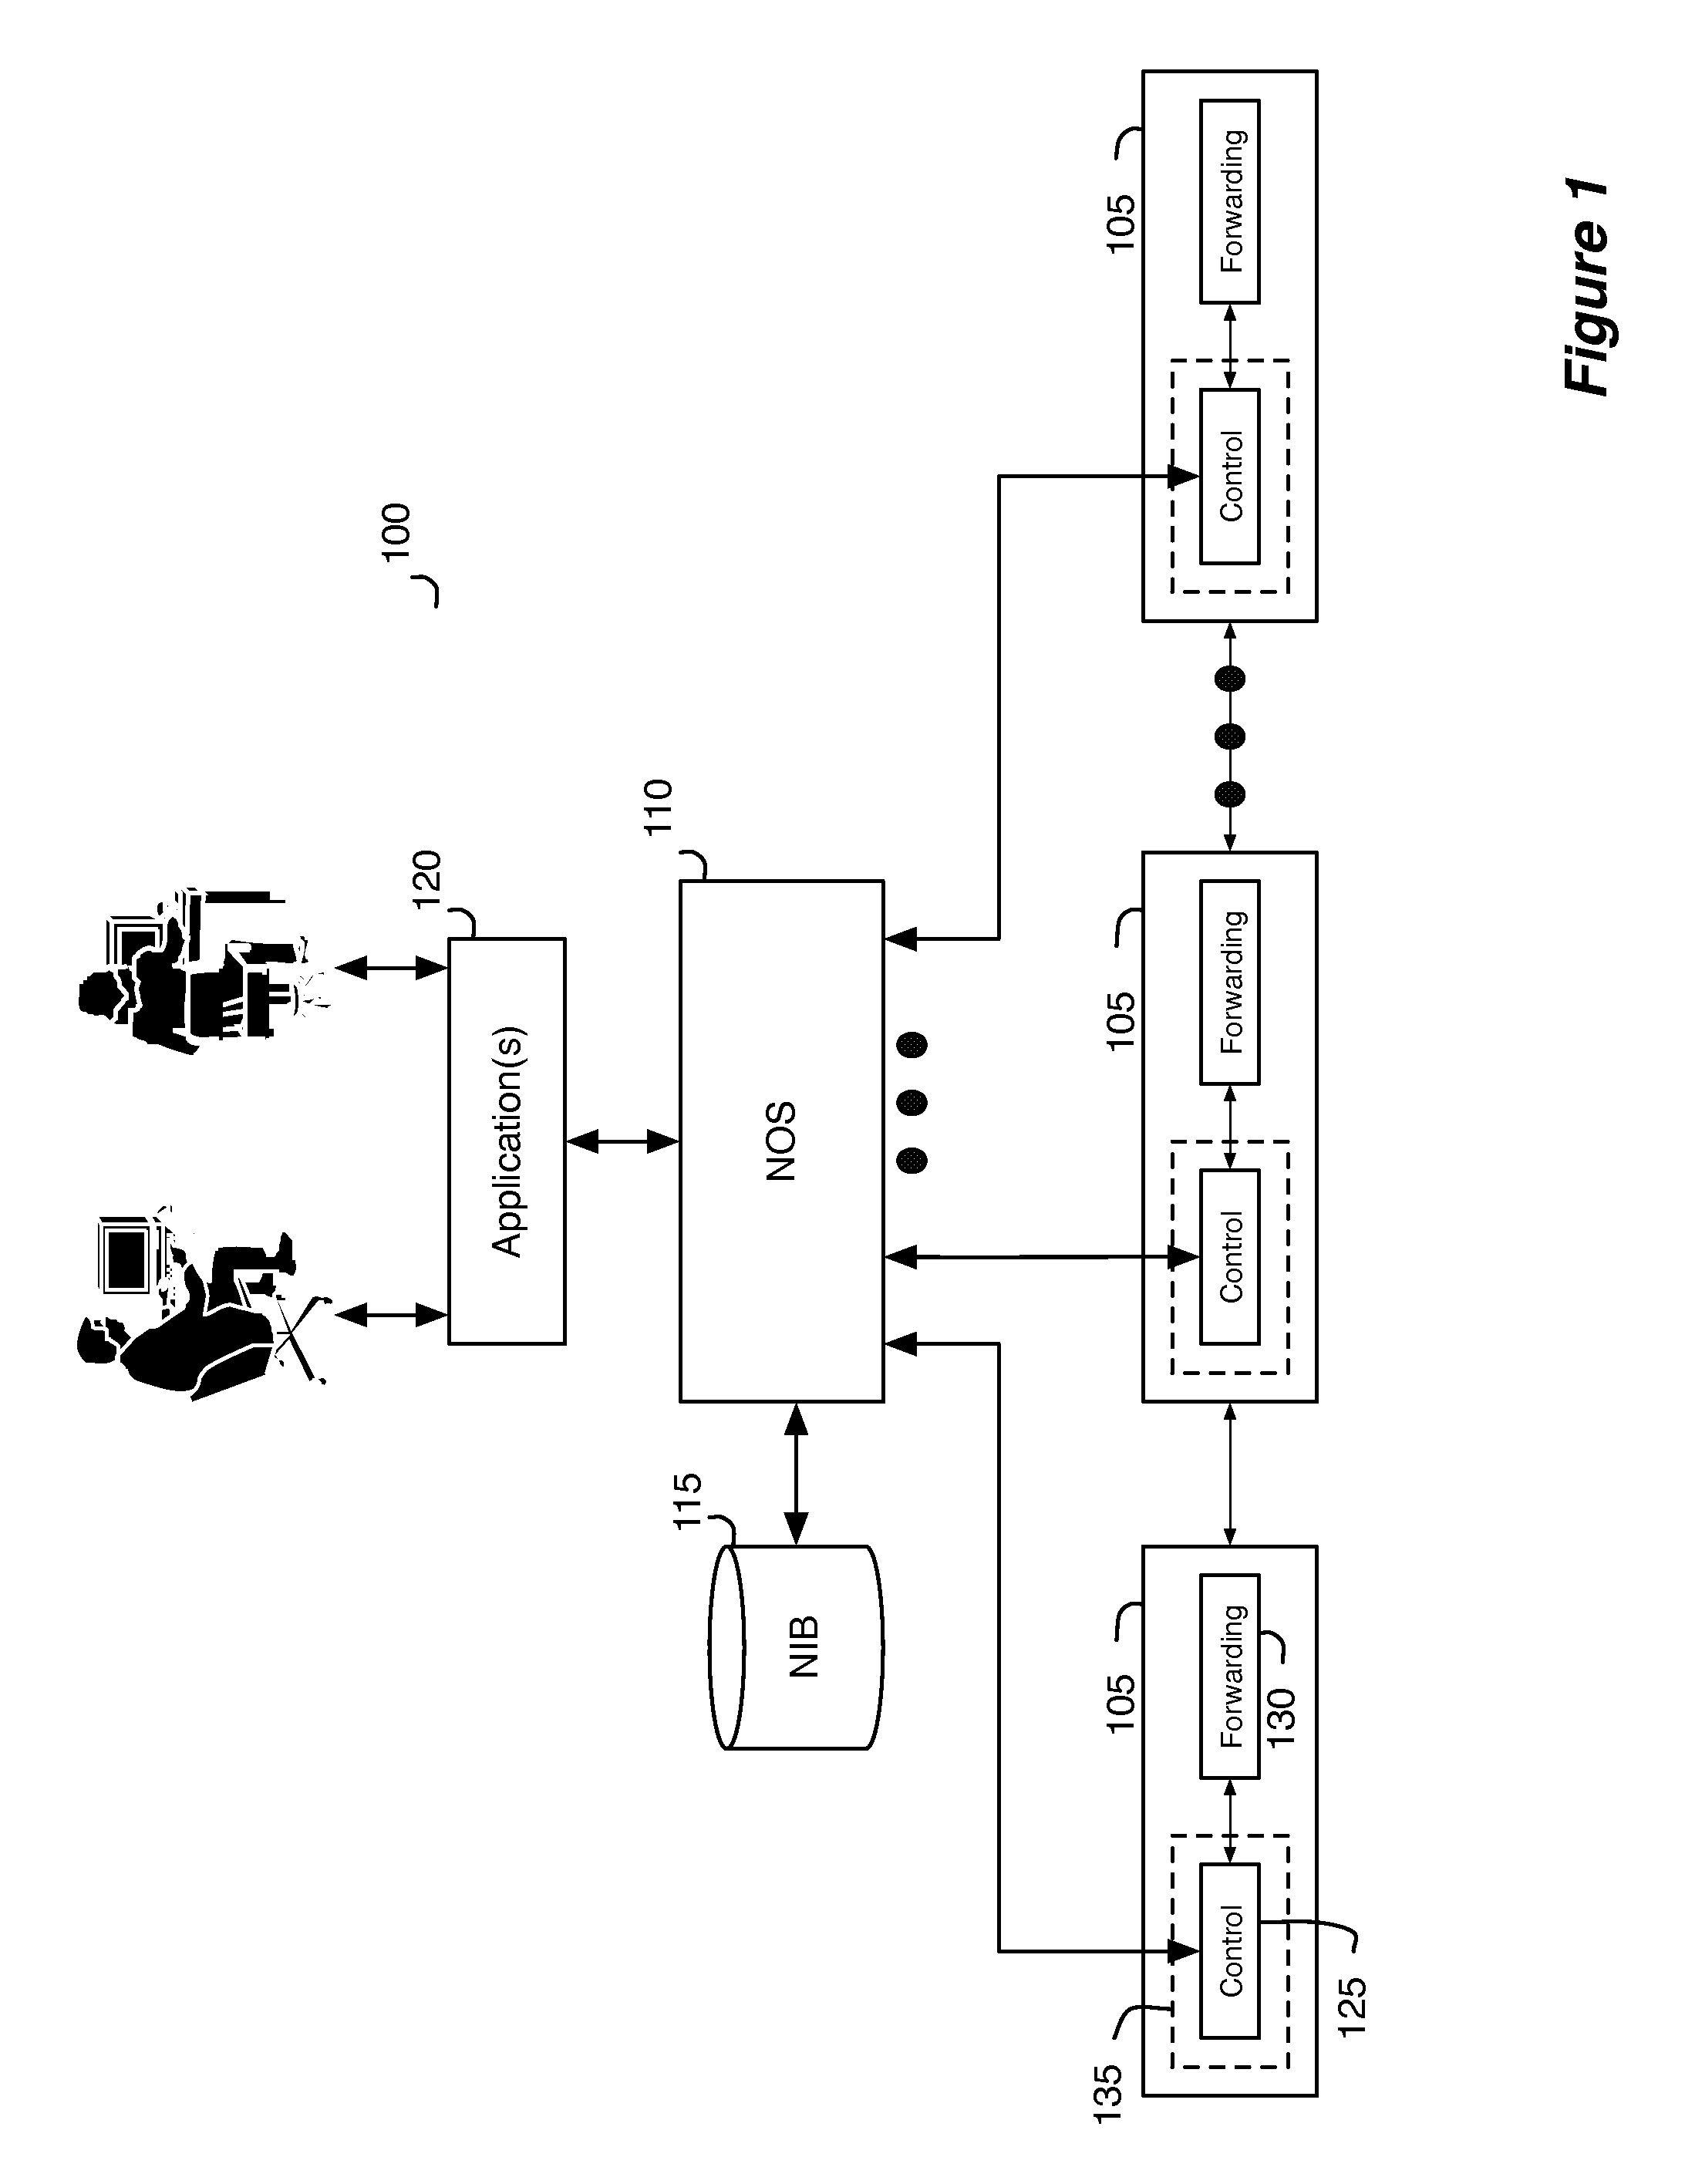 Network virtualization apparatus and method with a table mapping engine